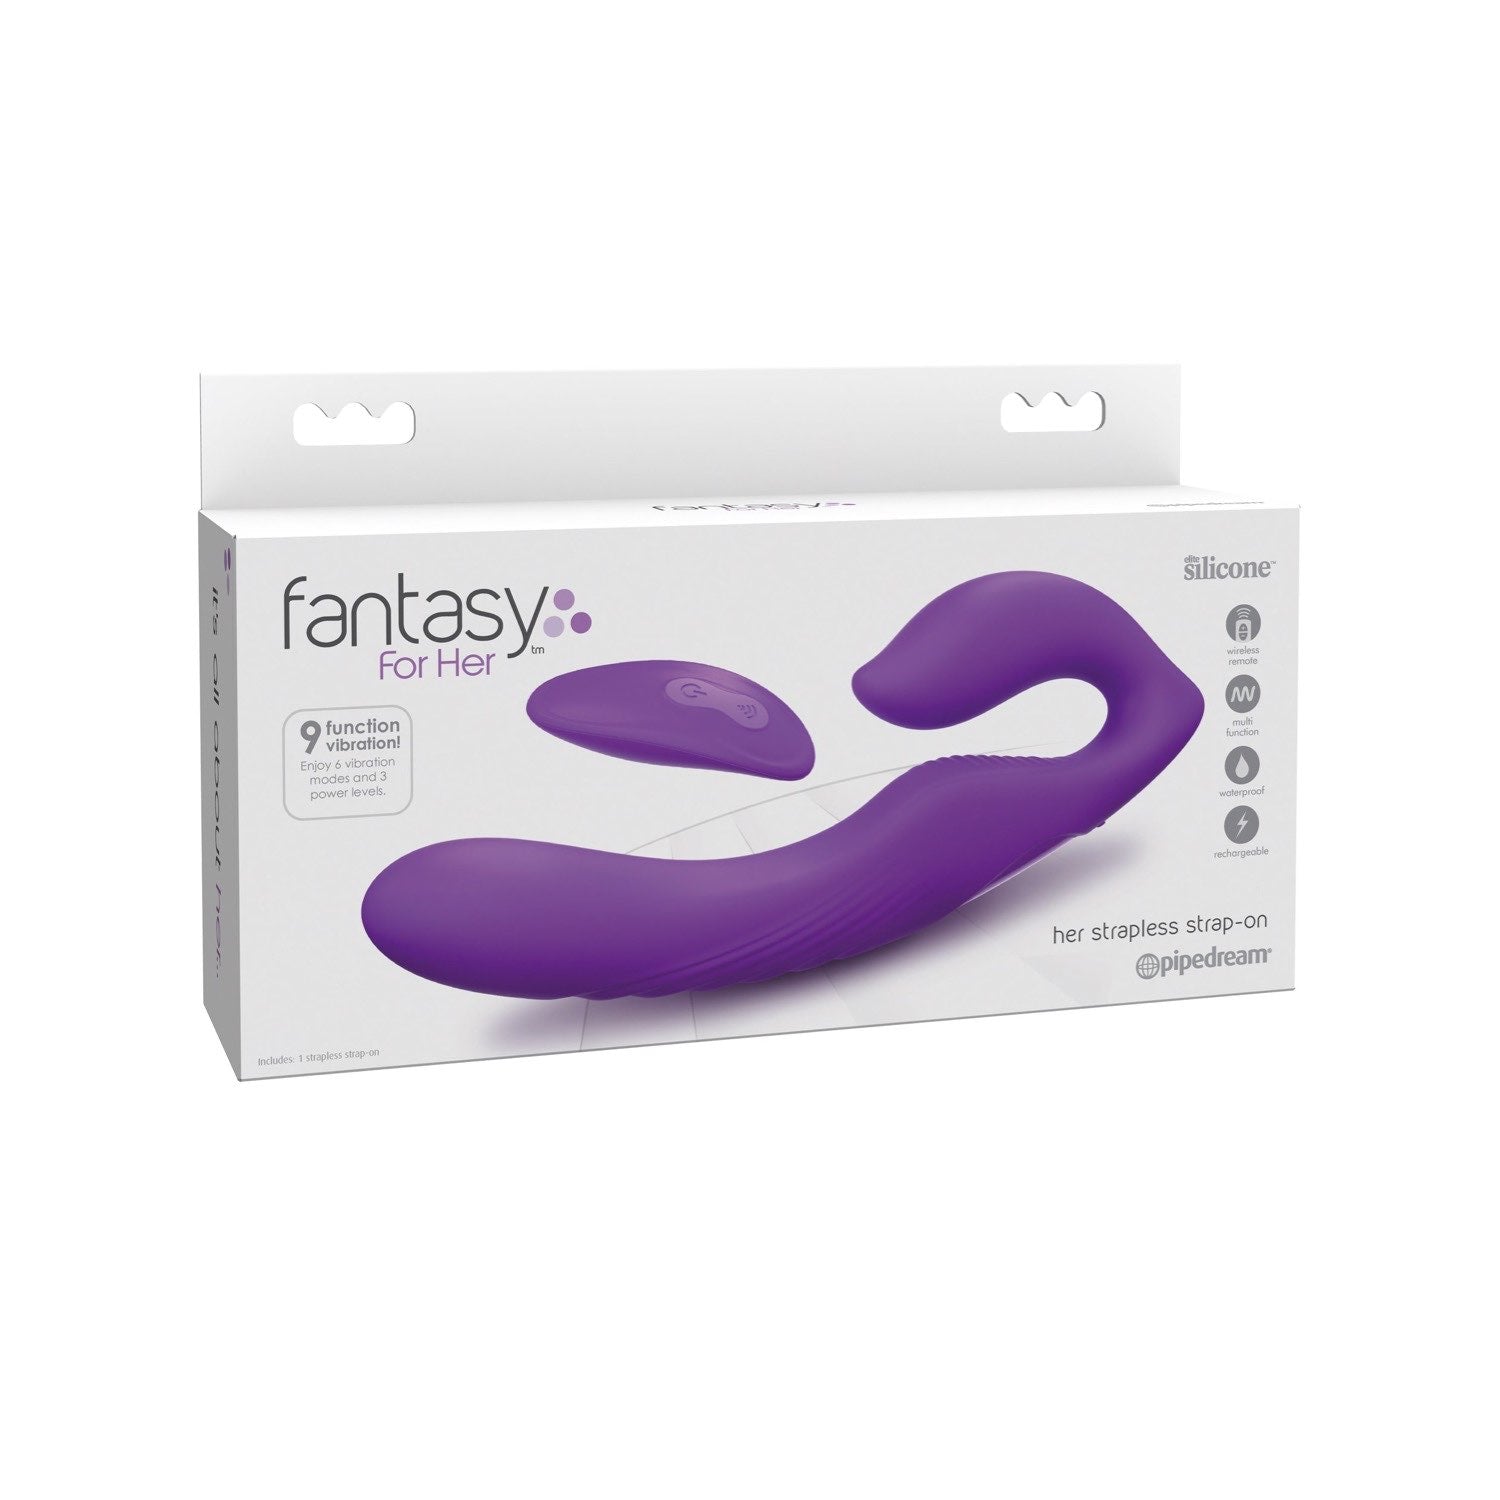 Fantasy For Her Ultimate Strapless Strap-On - Purple USB Rechargeable Strapless Strap-On with Wireless Remote by Pipedream